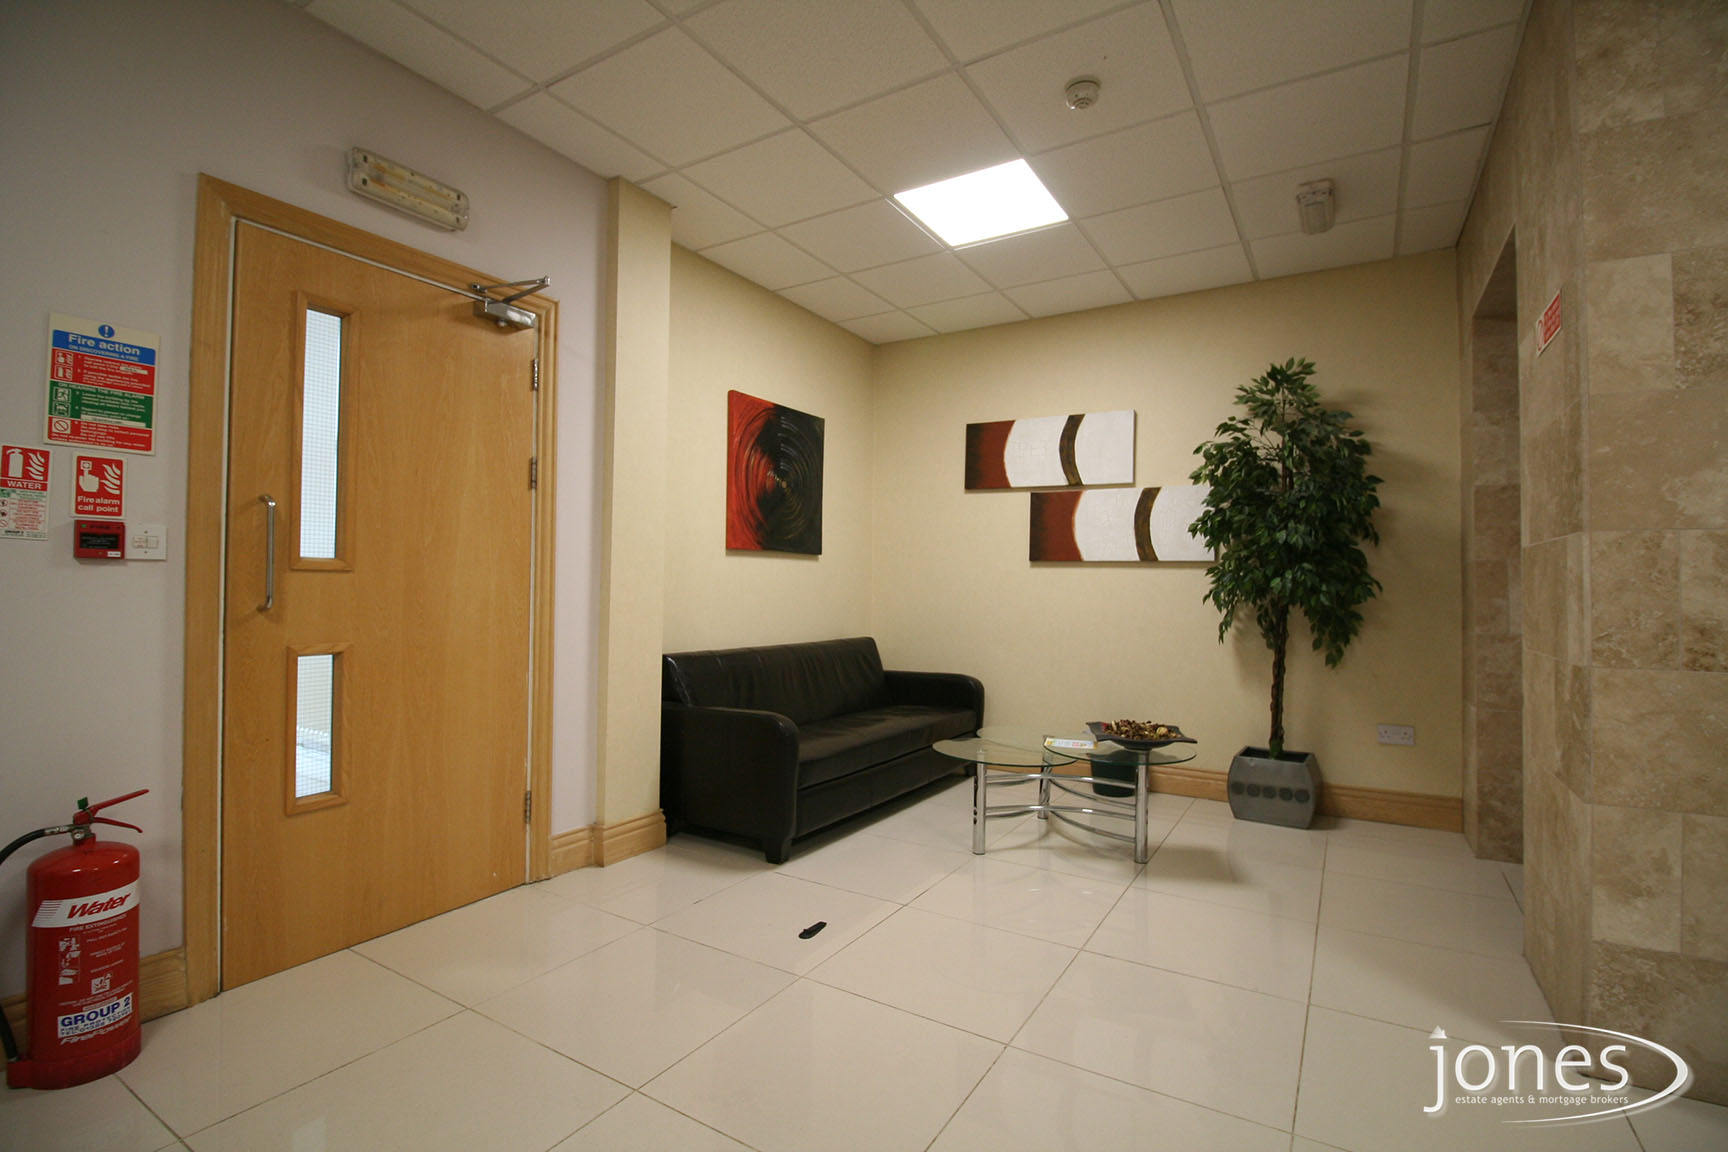 Home for Sale Let - Photo 05 Durham Tees Valley Business Centre,Orde Wingate Way,Stockton on Tees, TS19 0GD